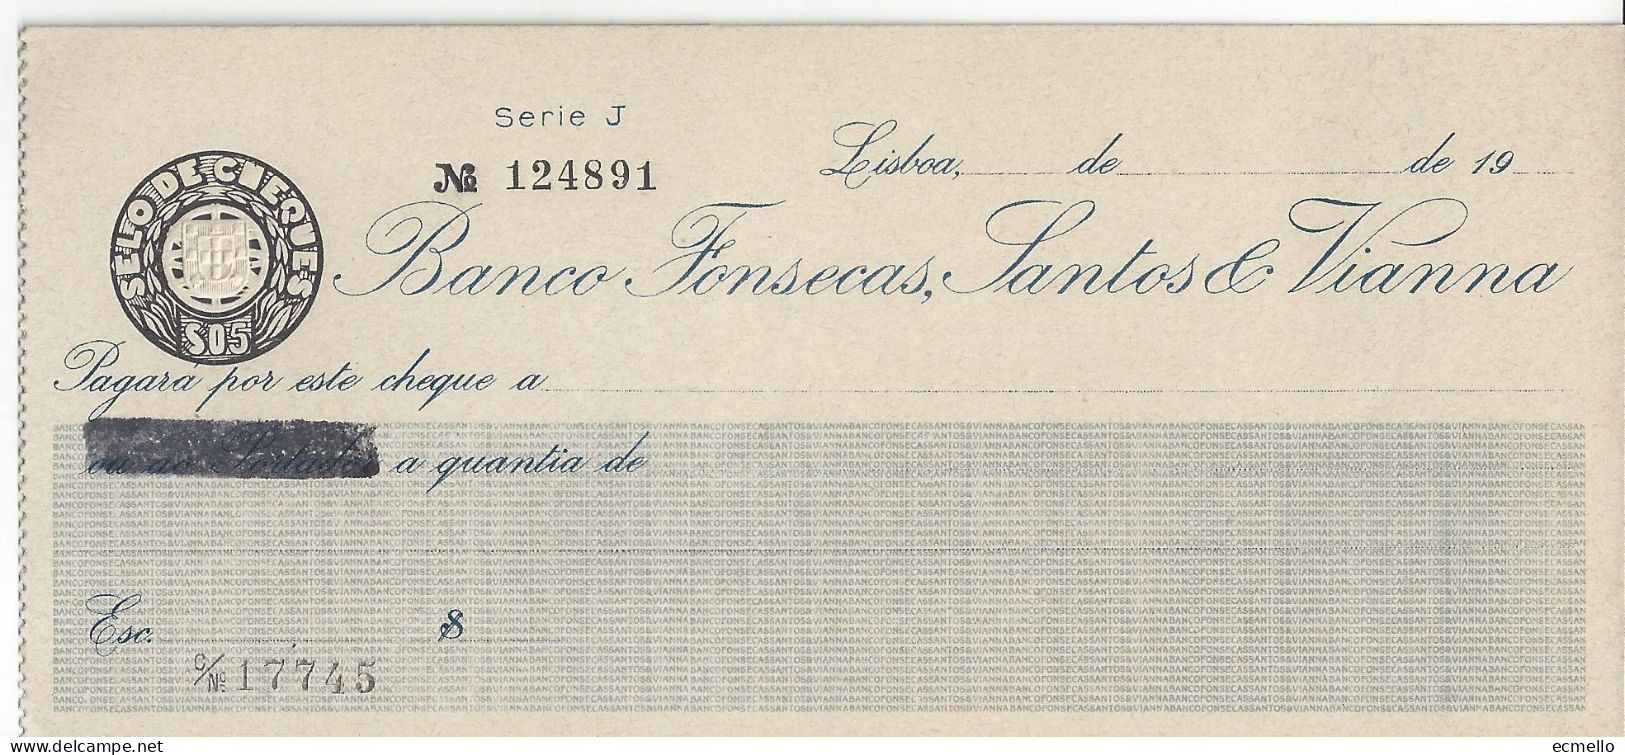 PORTUGAL CHEQUE CHECK BANCO FONSECAS, SANTOS & VIANNA, 1950'S. - Cheques En Traveller's Cheques